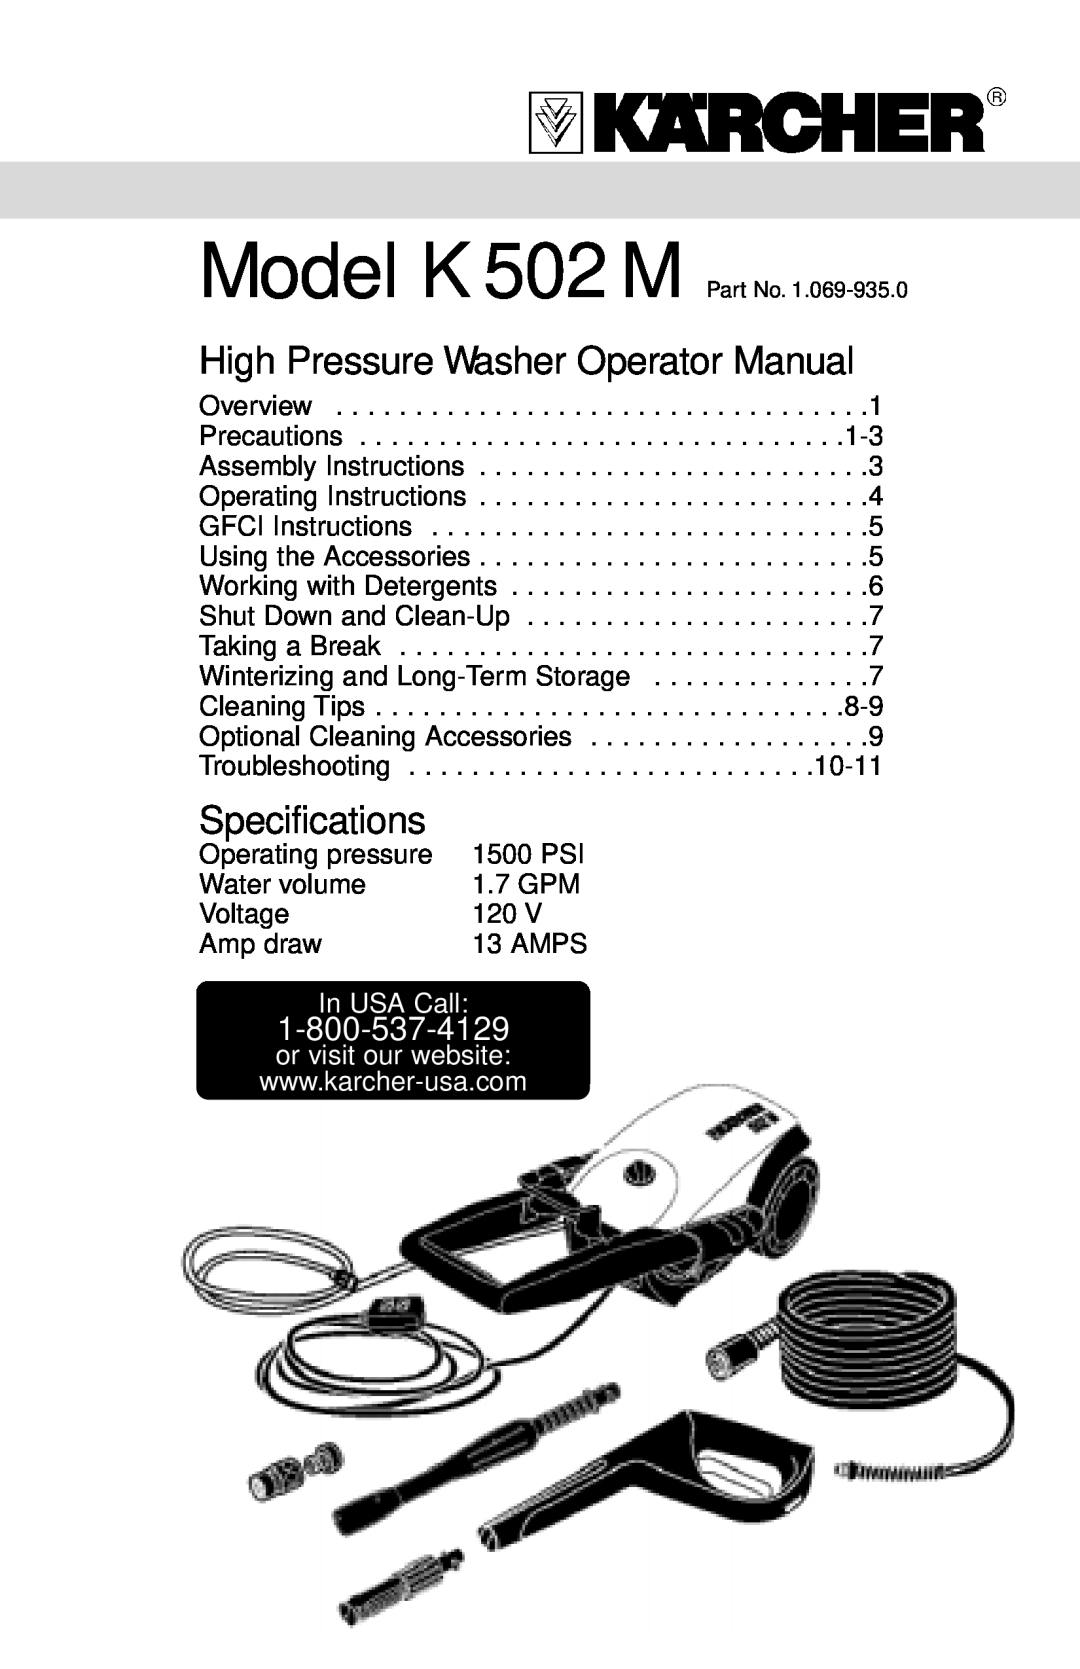 Karcher K 502 specifications In USA Call, High Pressure Washer Operator Manual, Specifications 